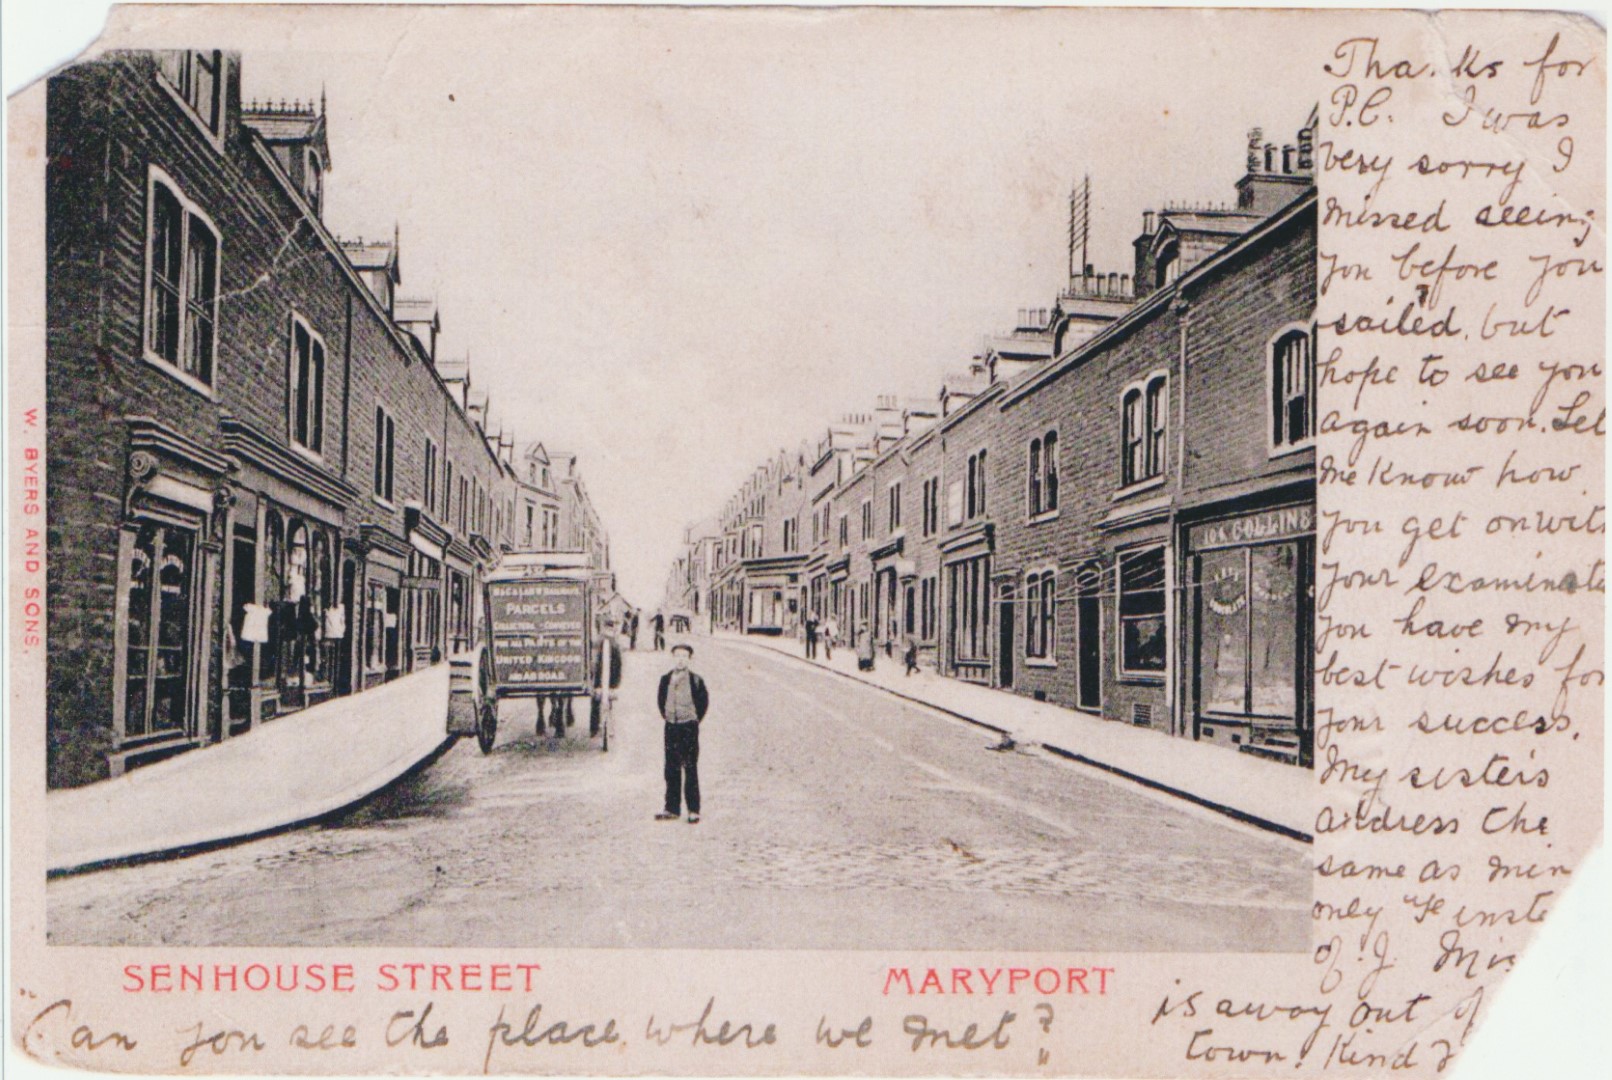 Senhouse Street from Curzon Street boy horse parcel delivery notes on picture